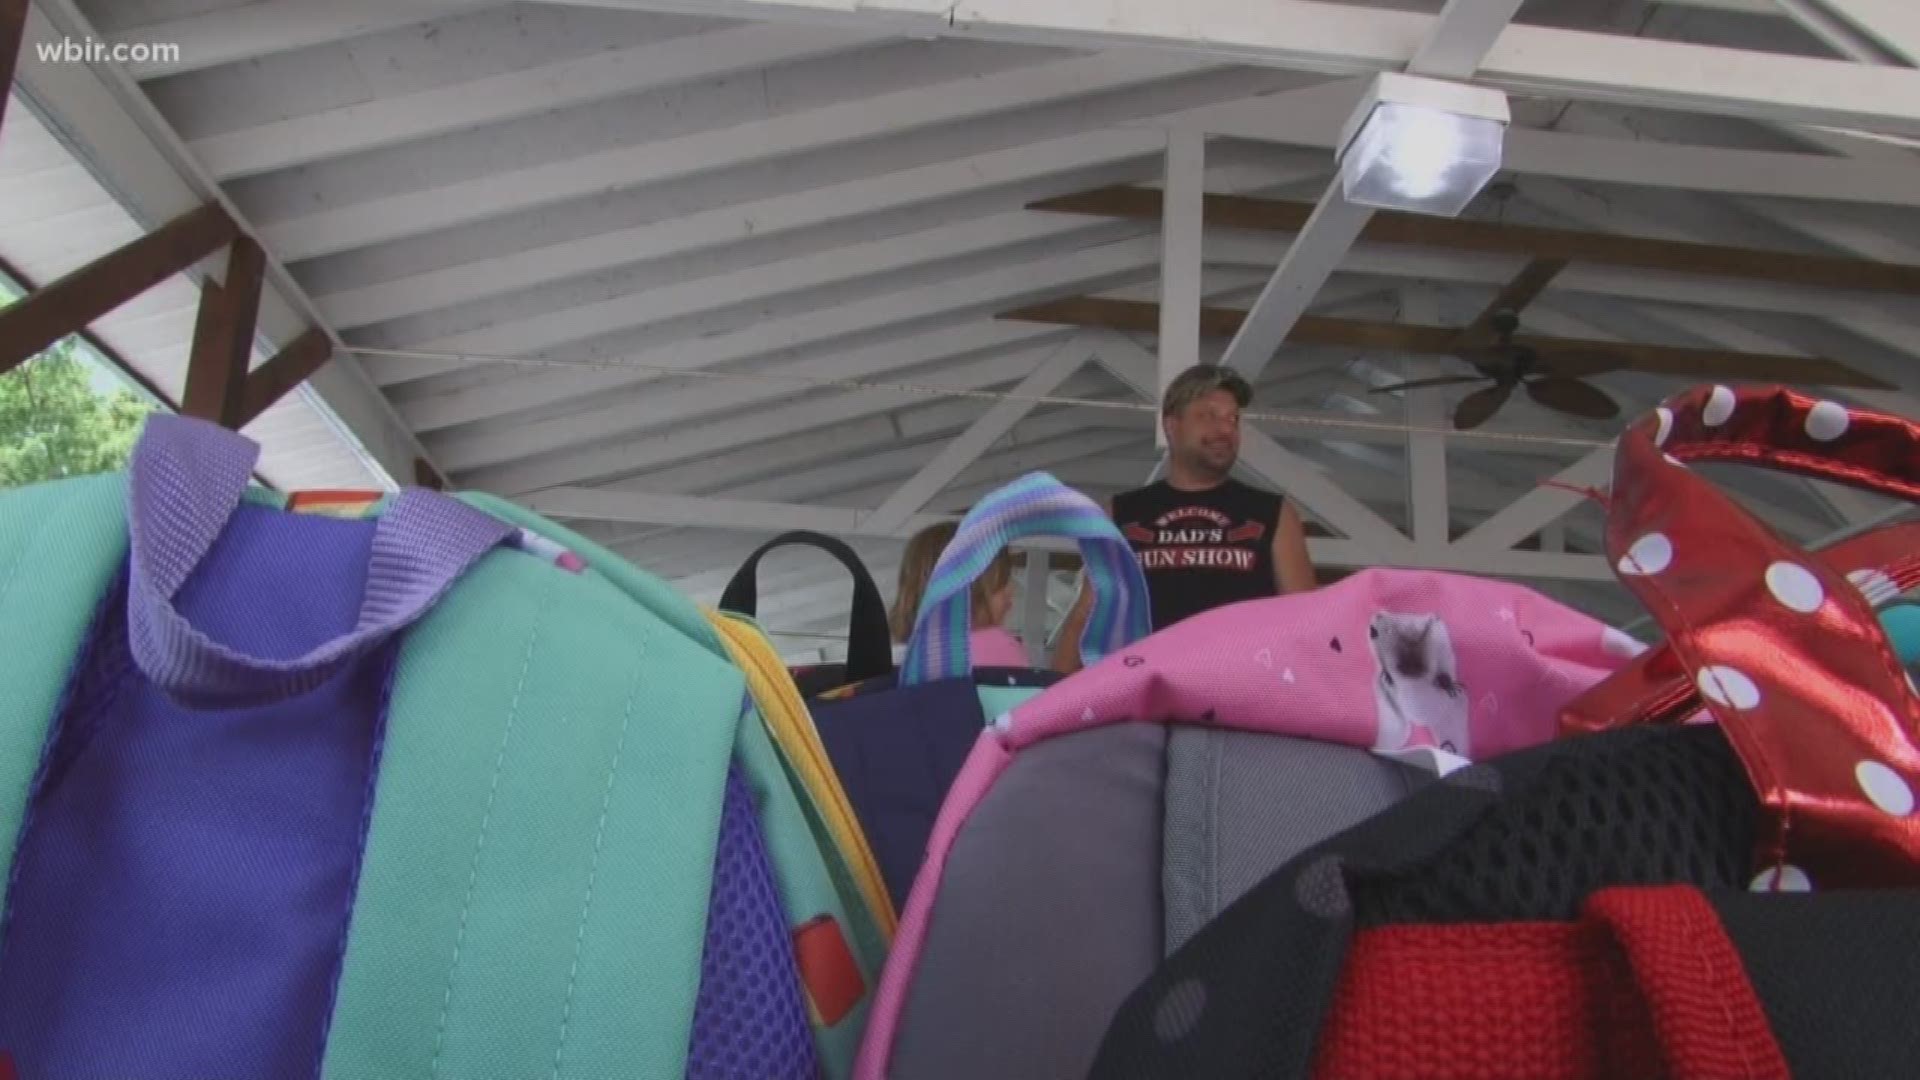 A church in Cocke County is helping families prepare for school with free school supplies.